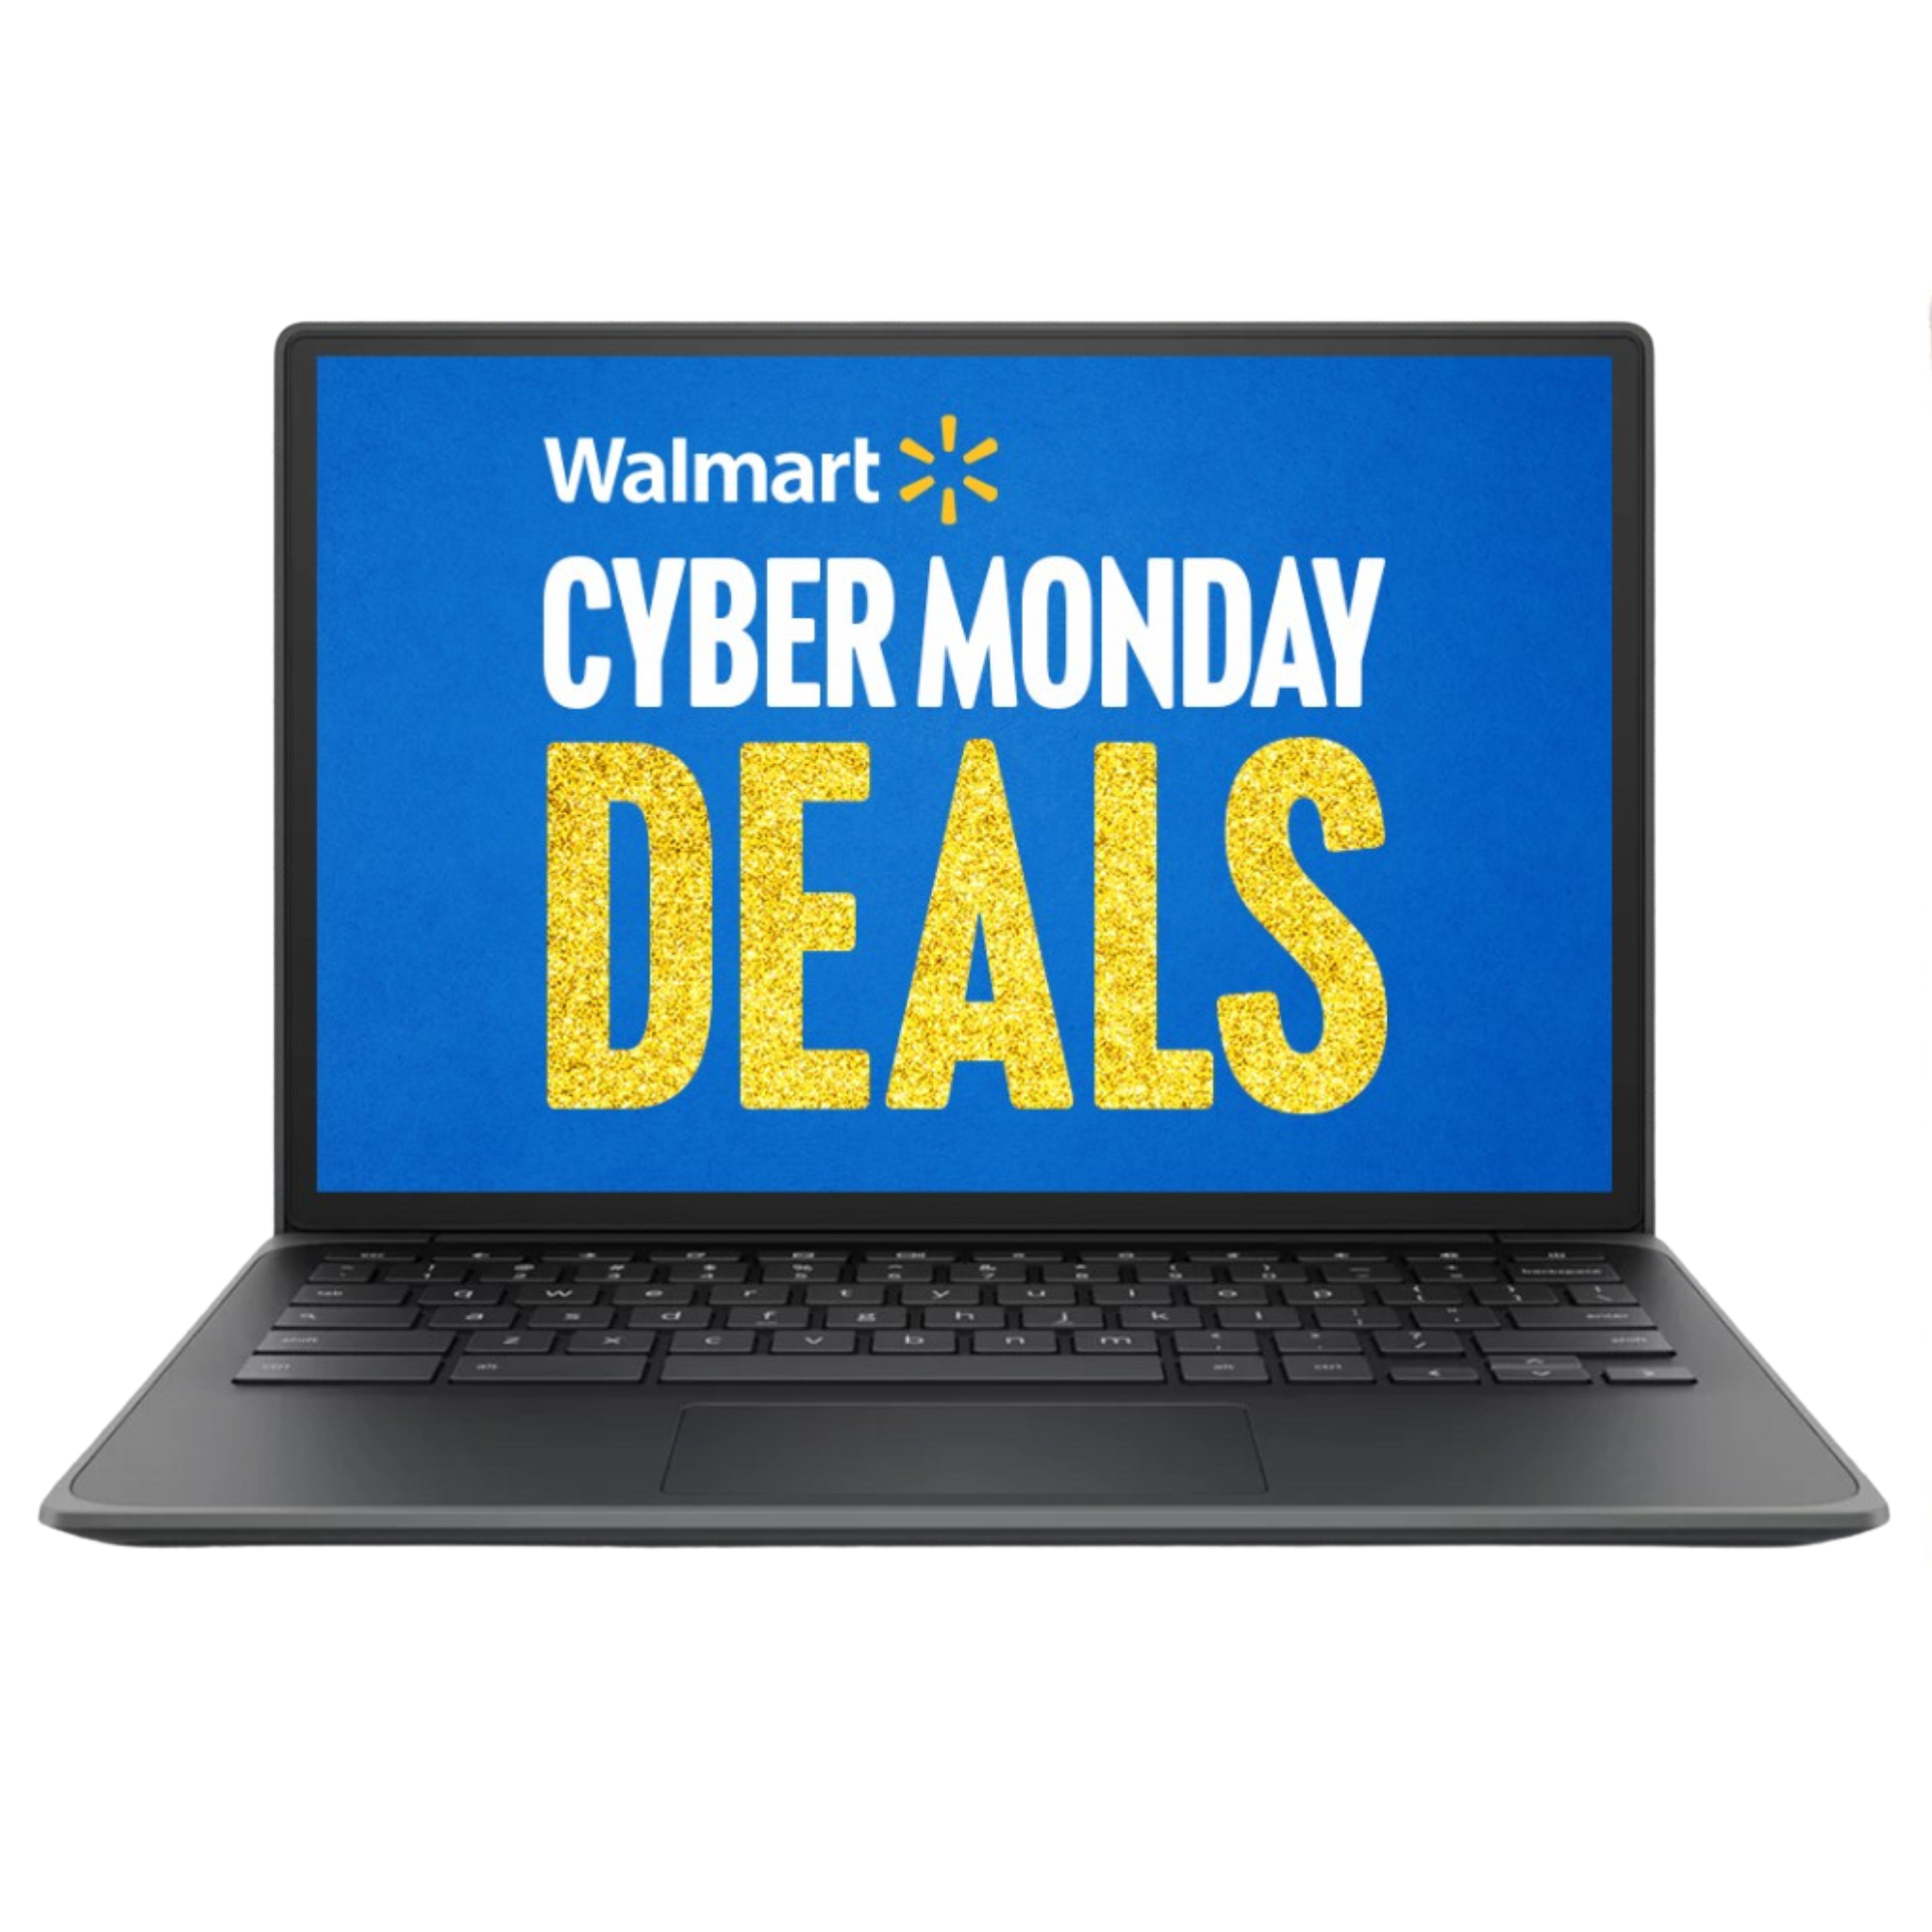 2 Hours Left: These Are The Best Cyber Monday Deals From Walmart That Are Still In Stock!